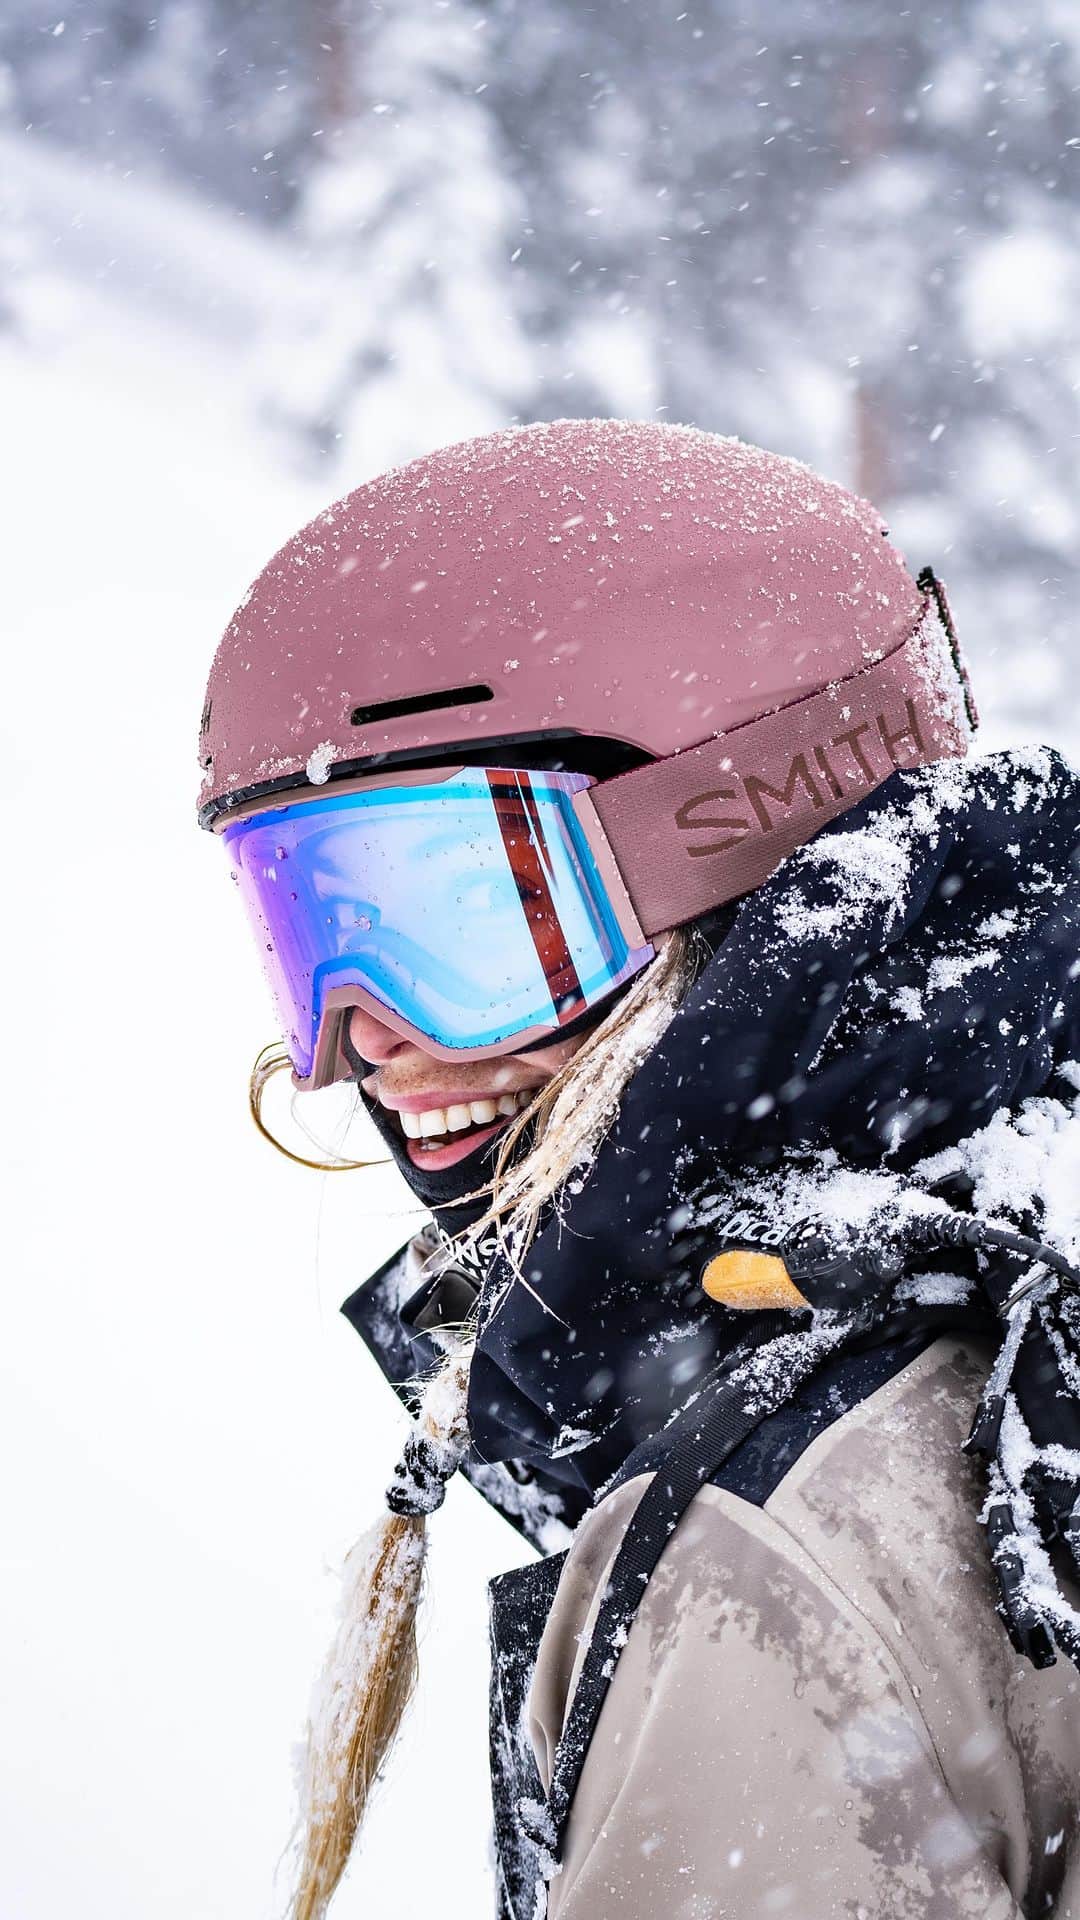 Smithのインスタグラム：「Introducing: The Method  Hit the hill with a helmet that combines the latest tech with clean lines and minimalist style. From park laps to powder missions, the Method delivers protection innovations like zonal @koroyd and @mipsprotection, along with amazing fit. Optimized for integration with Smith goggles, plus 8 fixed vents for airflow keep your vision clear even on the stormiest days. Step up your game, snap on a Method, and join the progression. #weruncold」